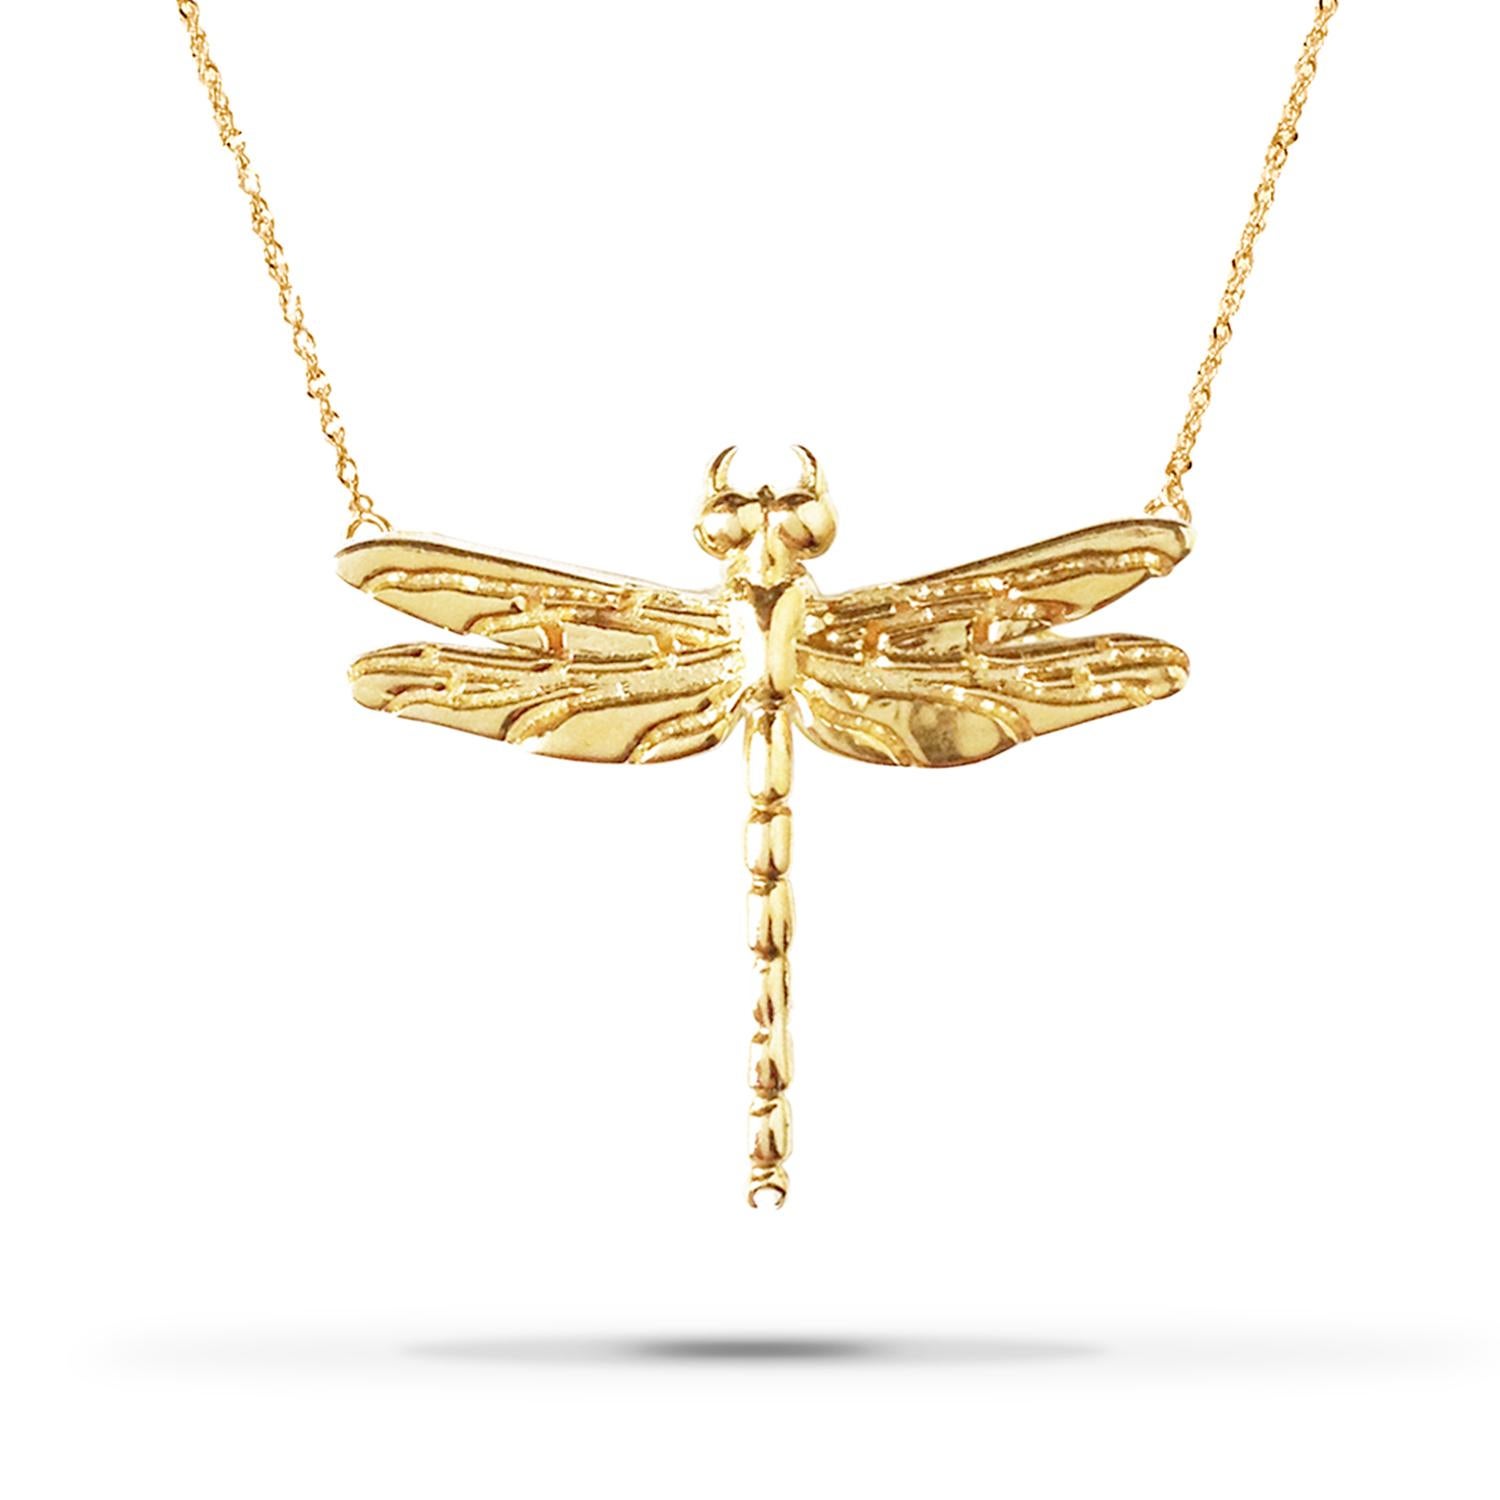 By Special Order Only

Experience the ethereal beauty of our Small Dragonfly Necklace in Plated Yellow Gold. Symbolizing adaptability and the radiance of light, dragonflies captivate with their otherworldly allure.

Crafted with precision, this